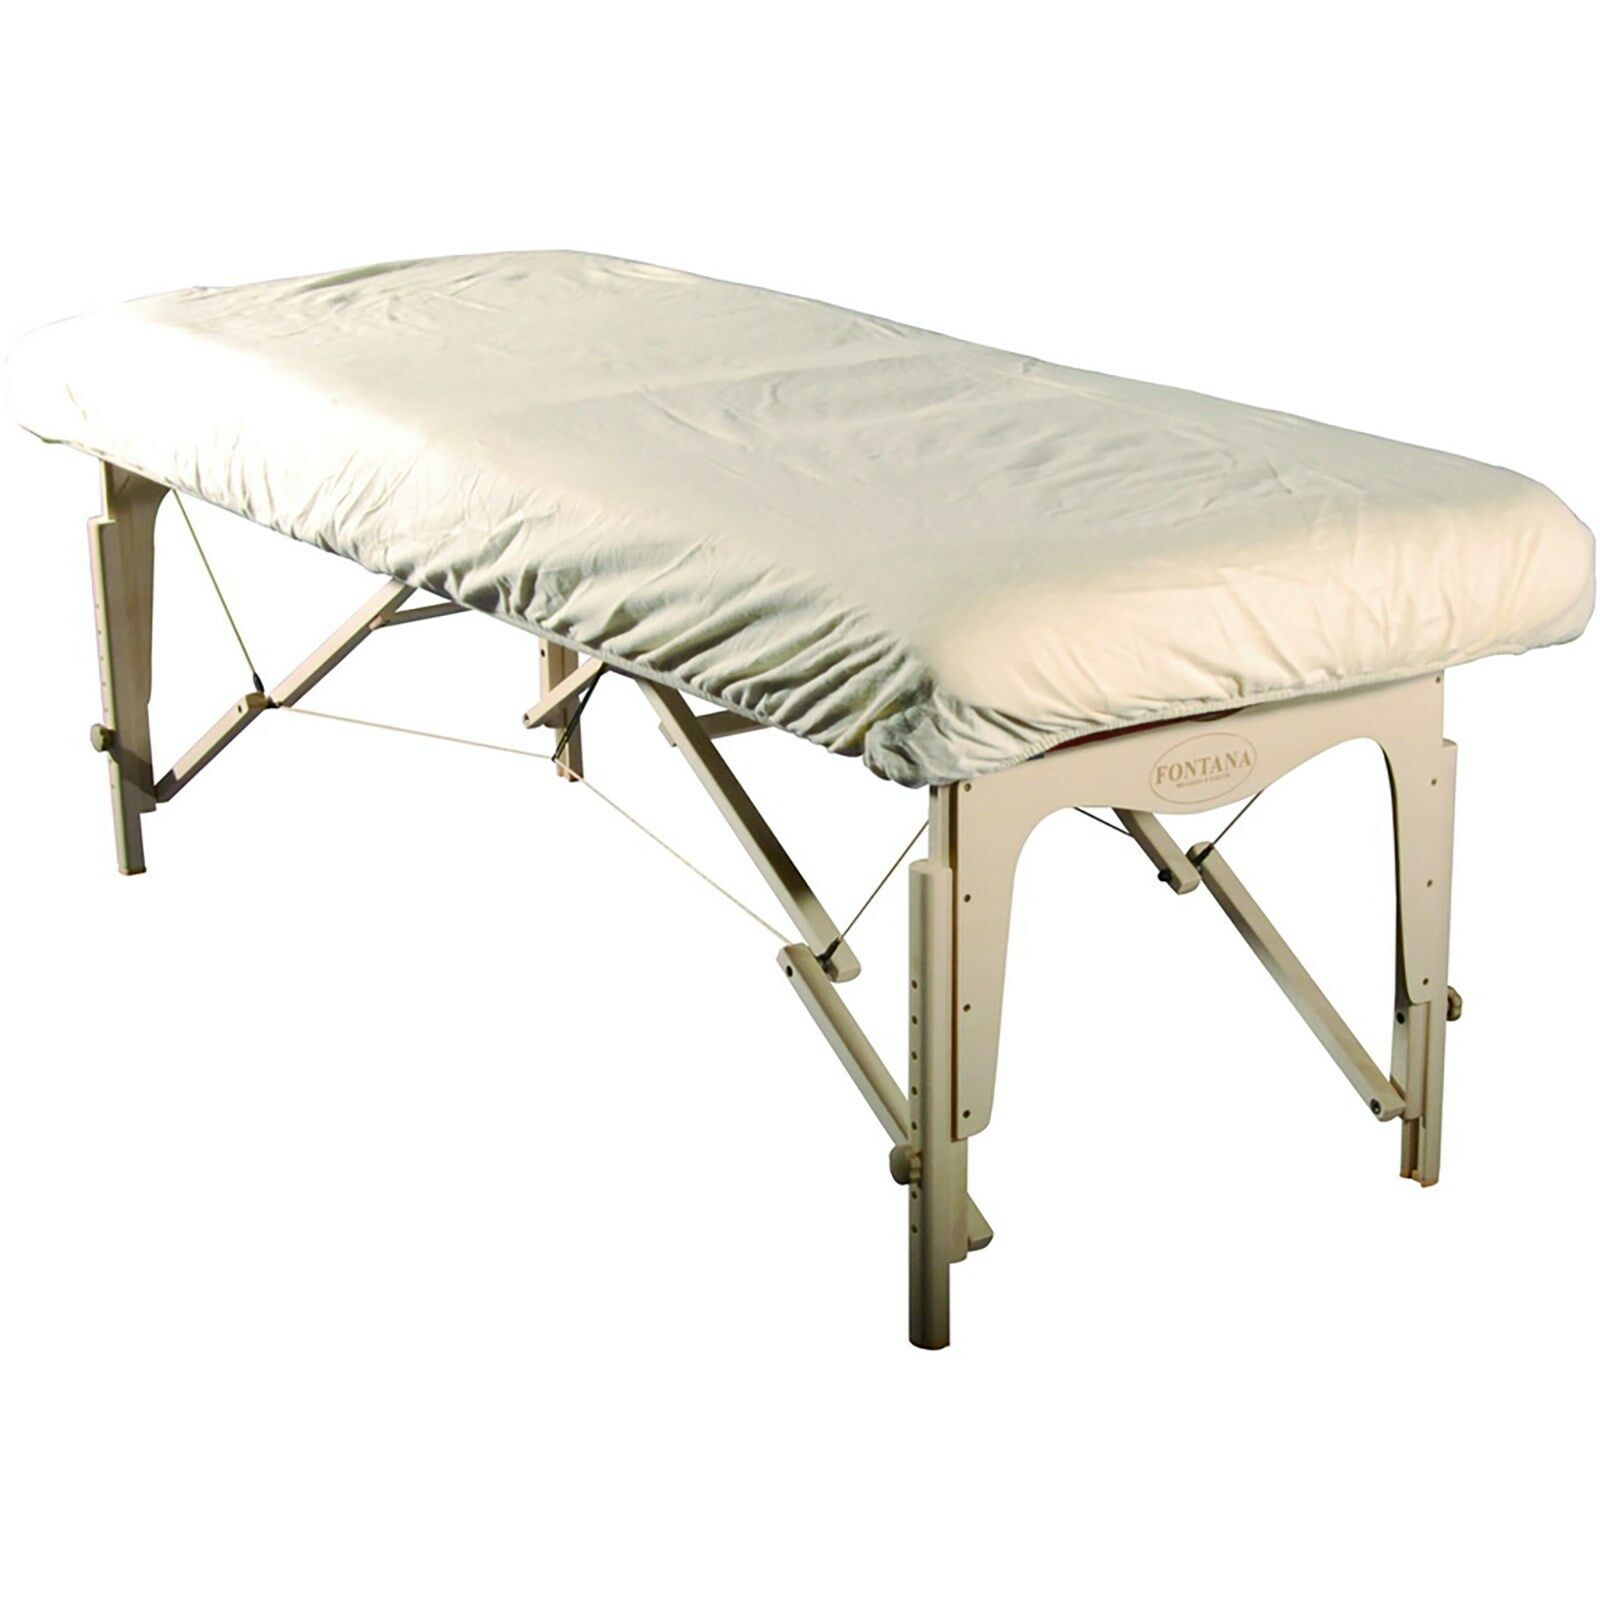 Master Massage Universal Size Cotton Natural Fitted Flannel Table Cover Sheet